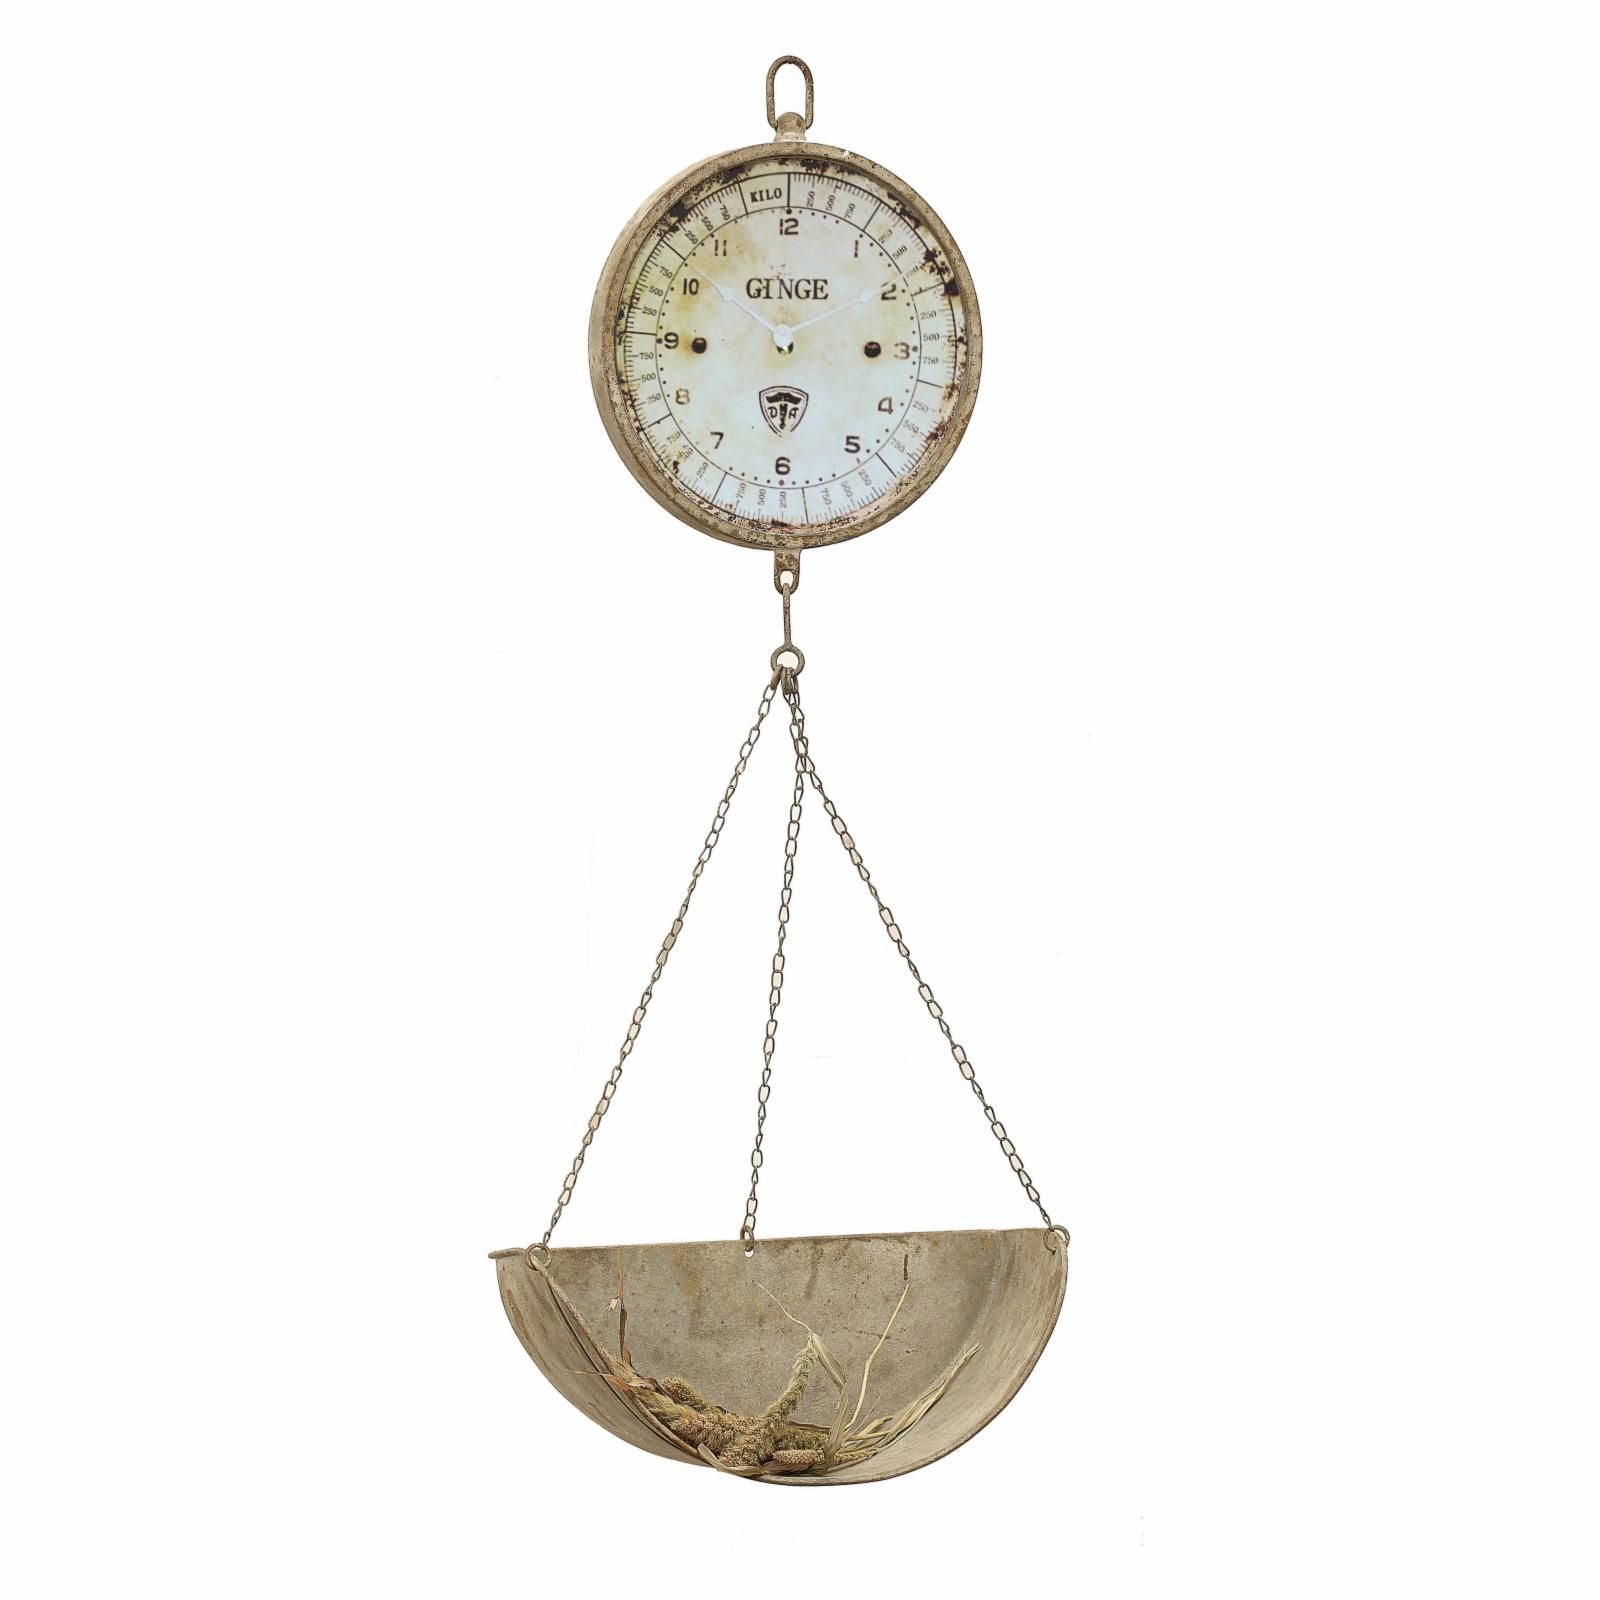 3R Studios 16.38 in. Reproduction of Hanging Produce Scale Wall Clock | Hayneedle